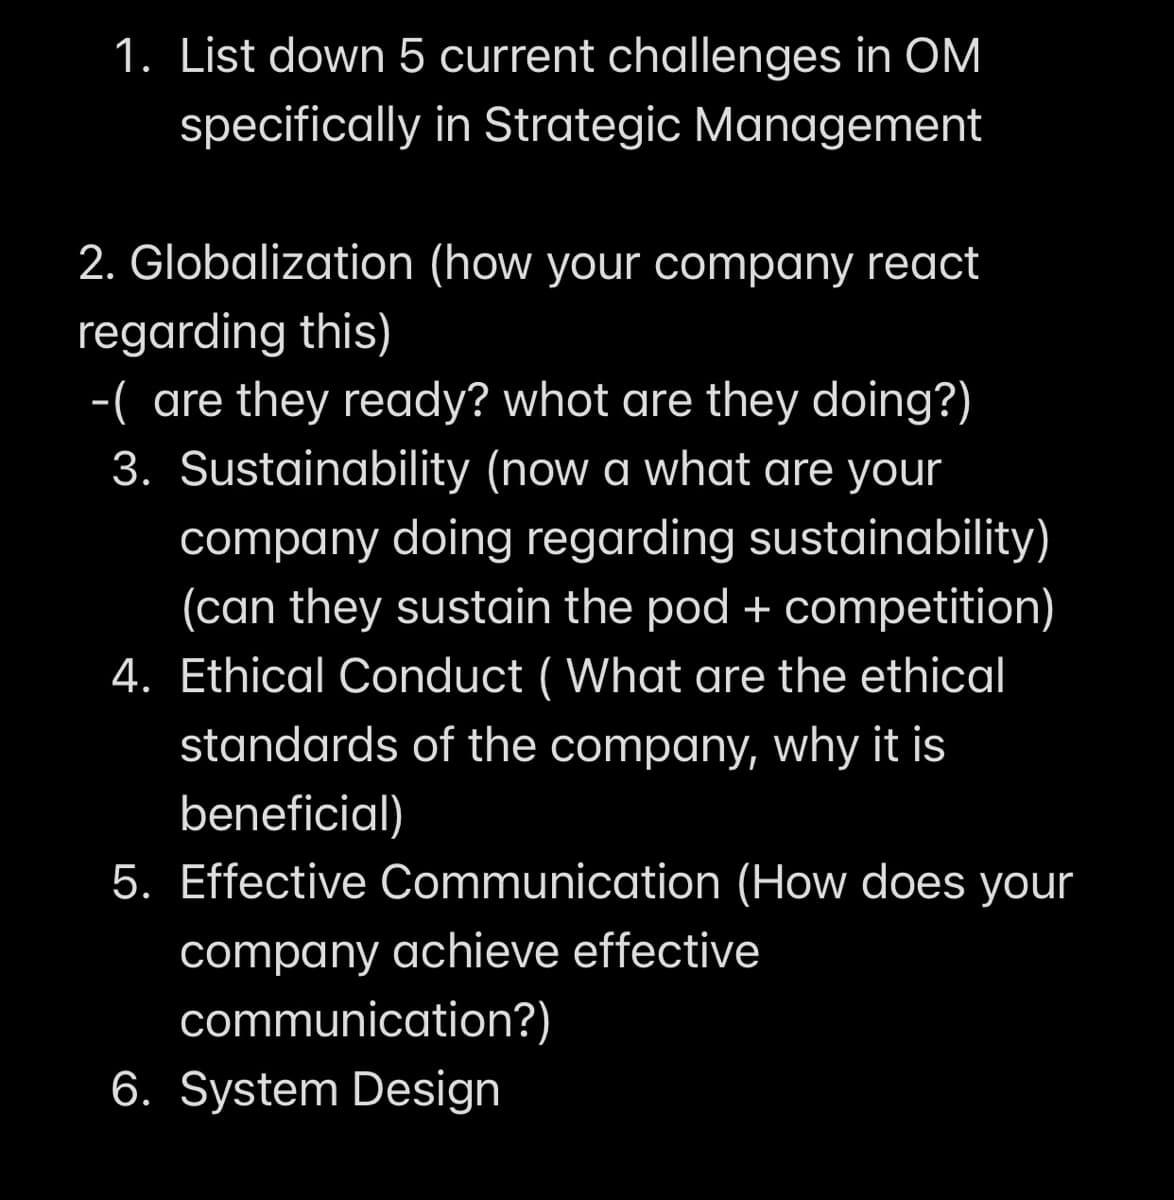 1. List down 5 current challenges in OM
specifically in Strategic Management
2. Globalization (how your company react
regarding this)
-( are they ready? whot are they doing?)
3. Sustainability (now a what are your
company doing regarding sustainability)
(can they sustain the pod + competition)
4. Ethical Conduct (What are the ethical
standards of the company, why it is
beneficial)
5. Effective Communication (How does your
company achieve effective
communication?)
6. System Design